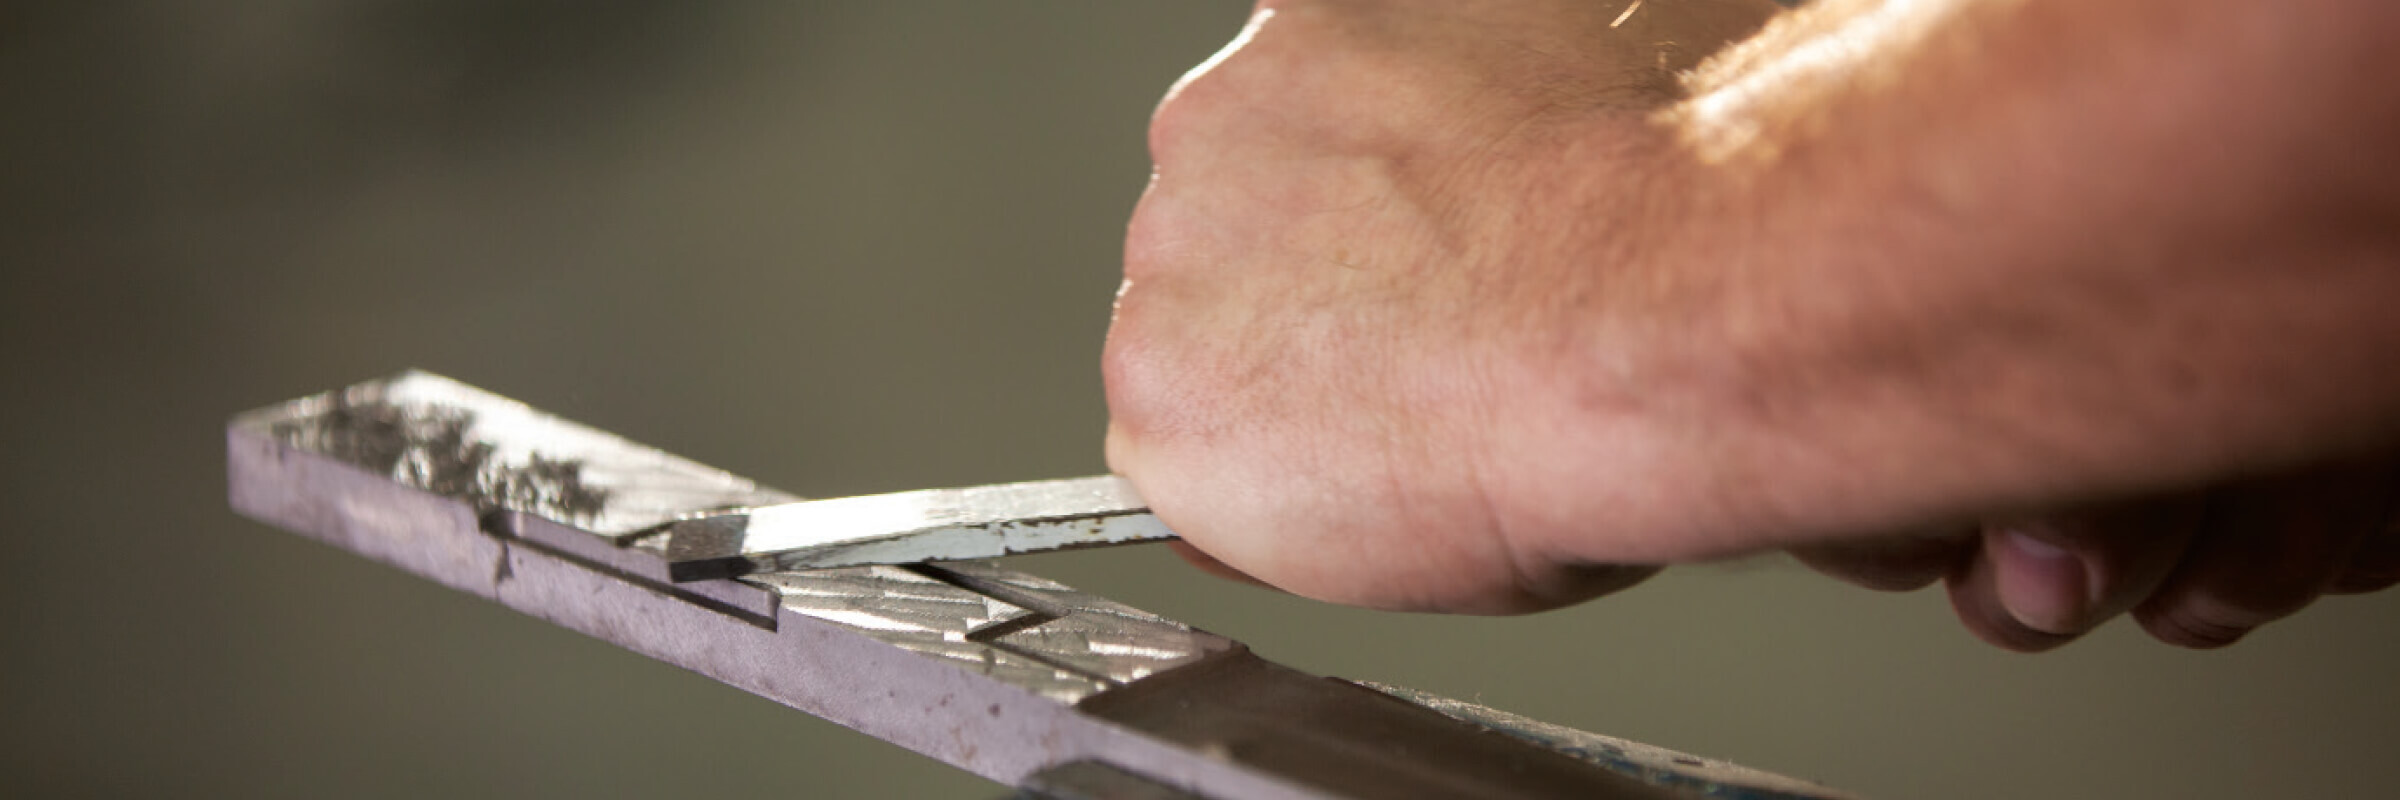 Hand Scraping Sets the Foundation for CNC Machining Accuracy and Long-Term Stability